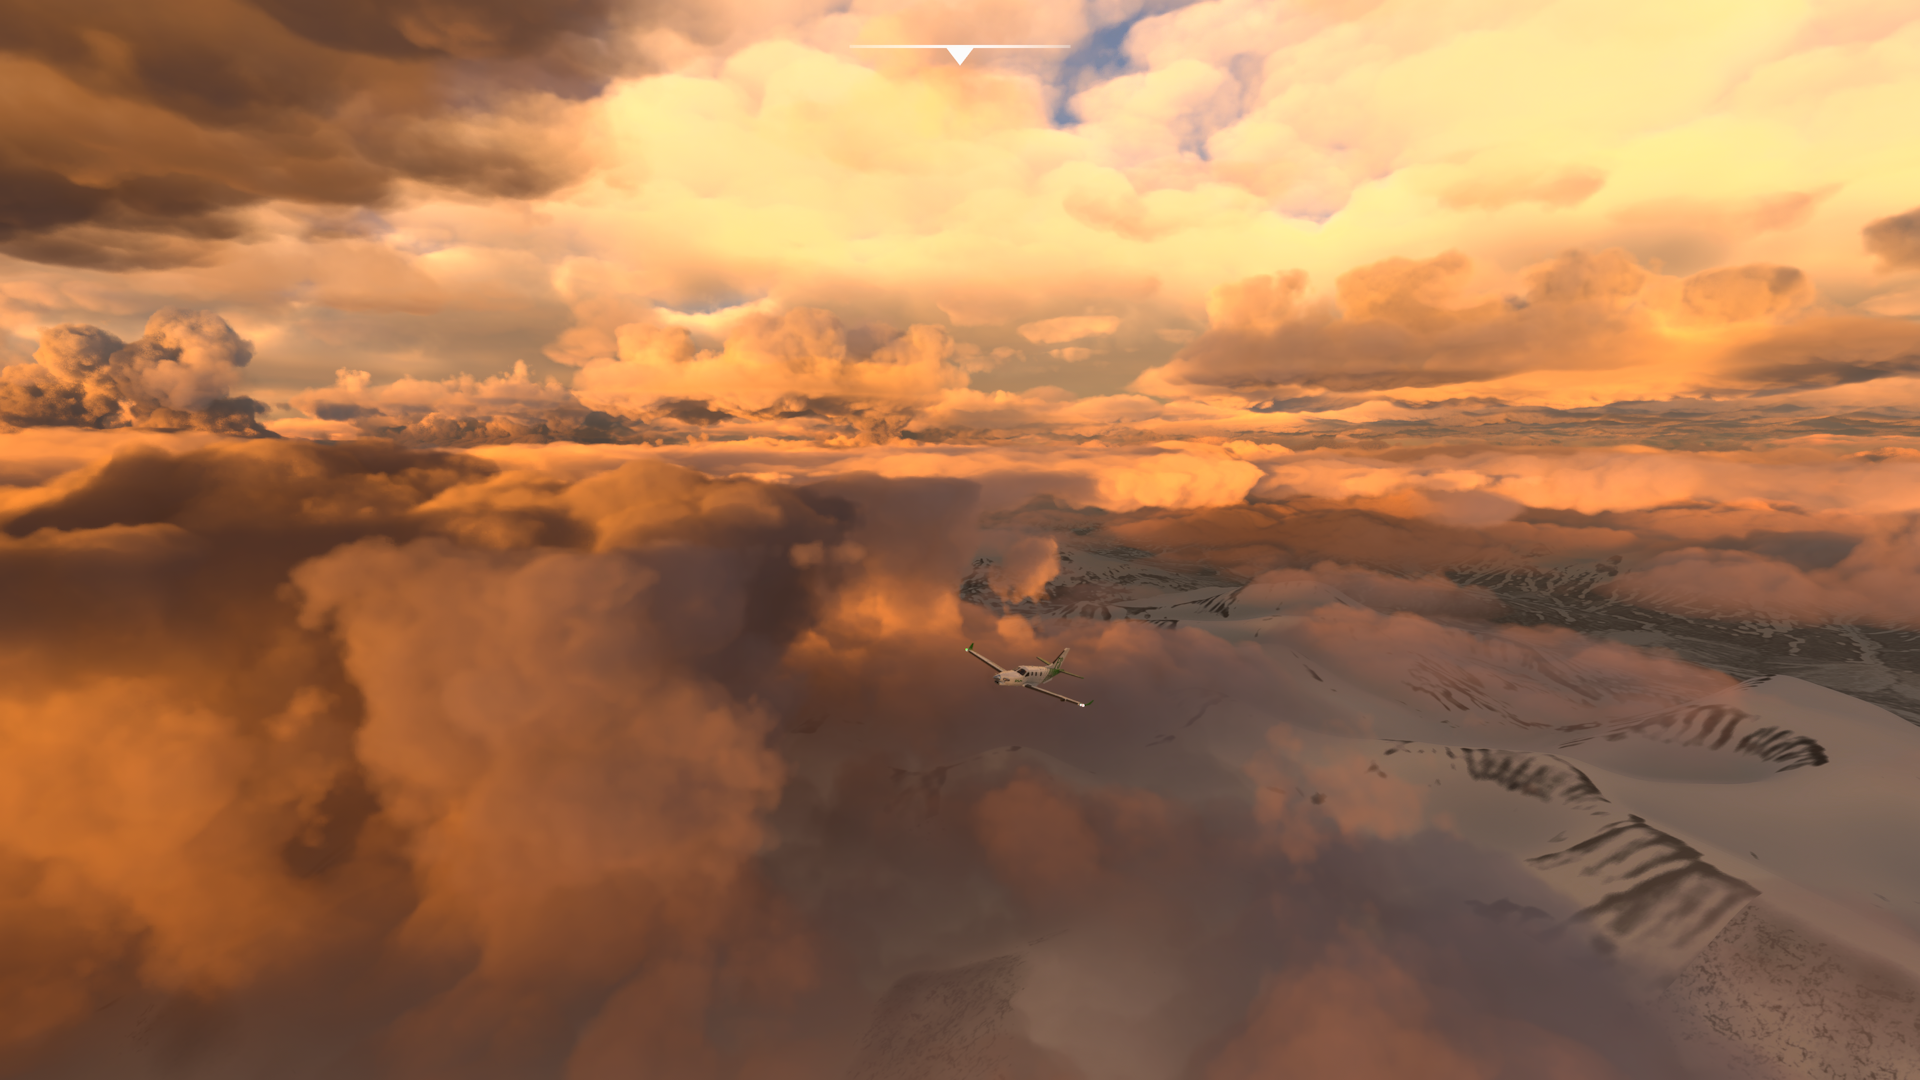 Another perspective over the Svalbard landscapes and clouds tainted by the sunset | Microsoft Flight Simulator